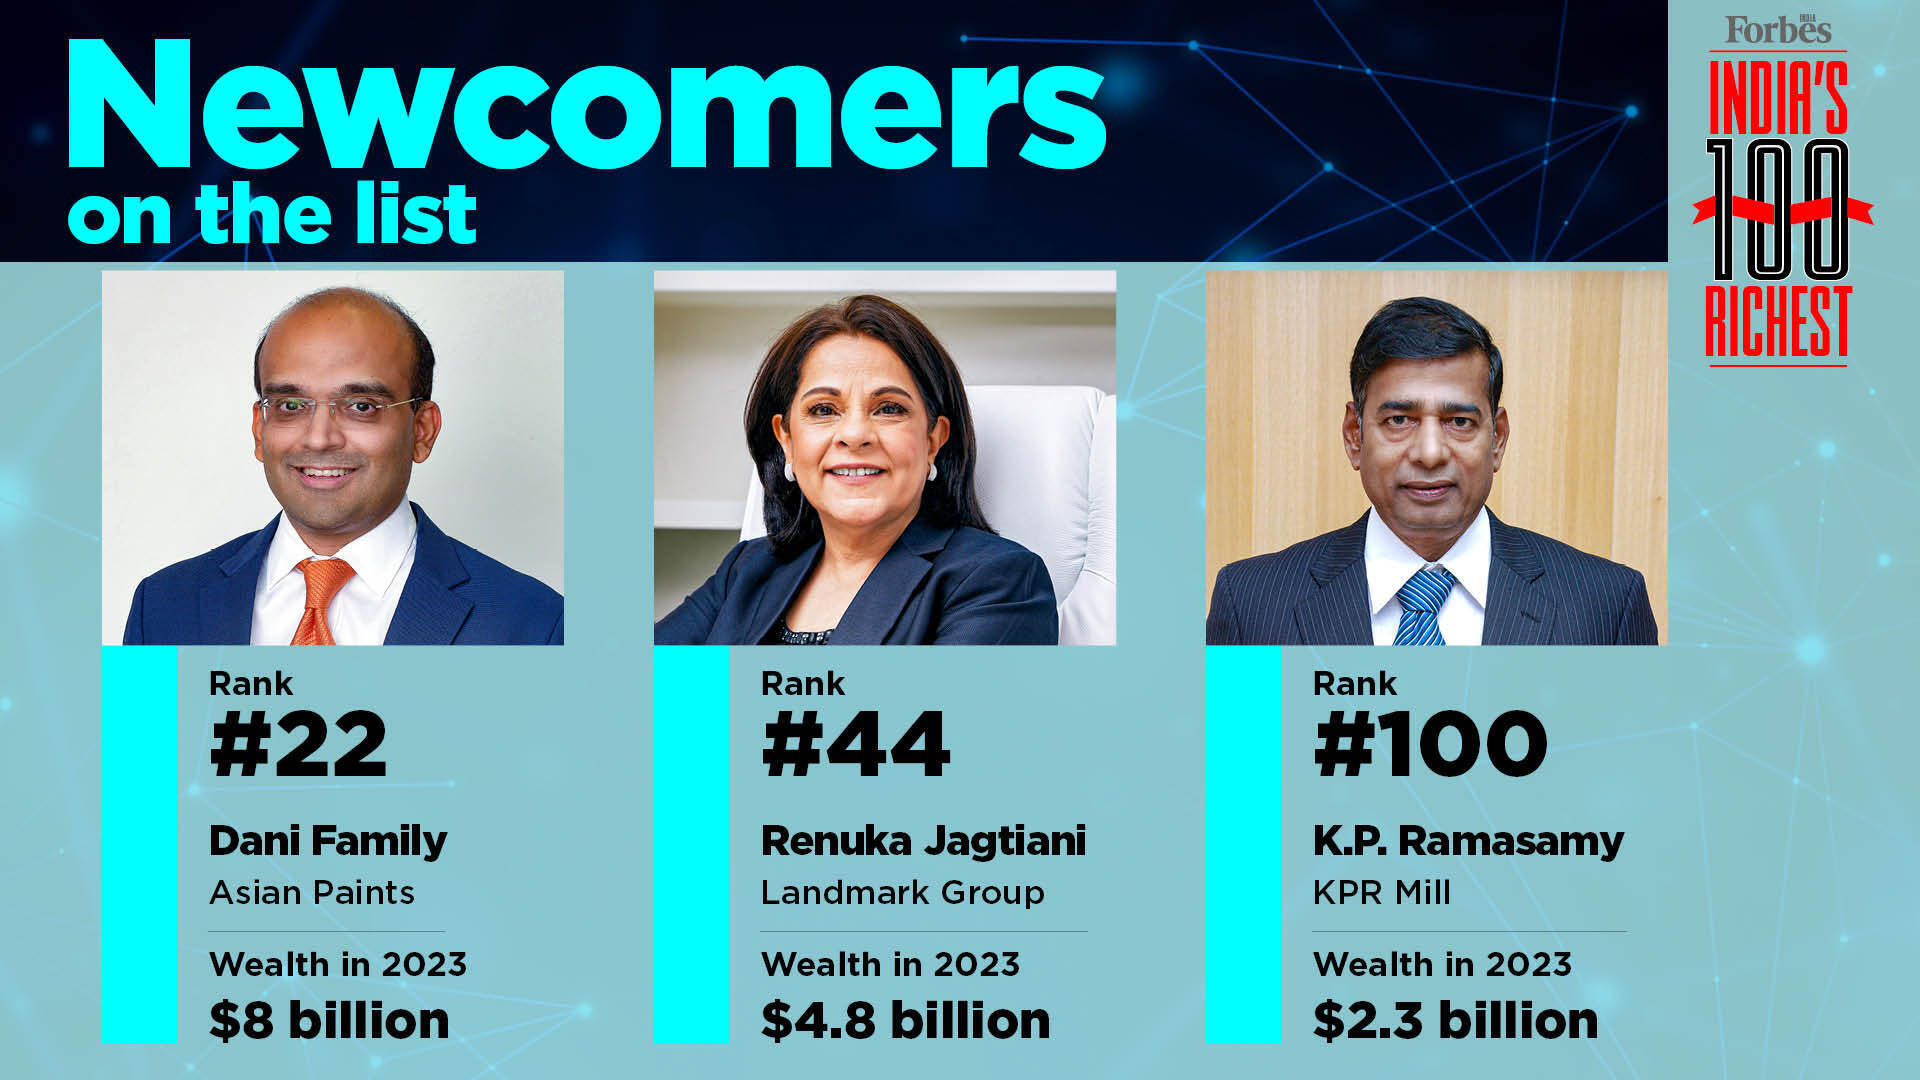 Forbes India on X: #ForbesIndiaRichList  Renuka Jagtiani of Landmark  Group and KPR Ramasamy of KPR Mills are two of the new members of India's  100 richest club. See the full list